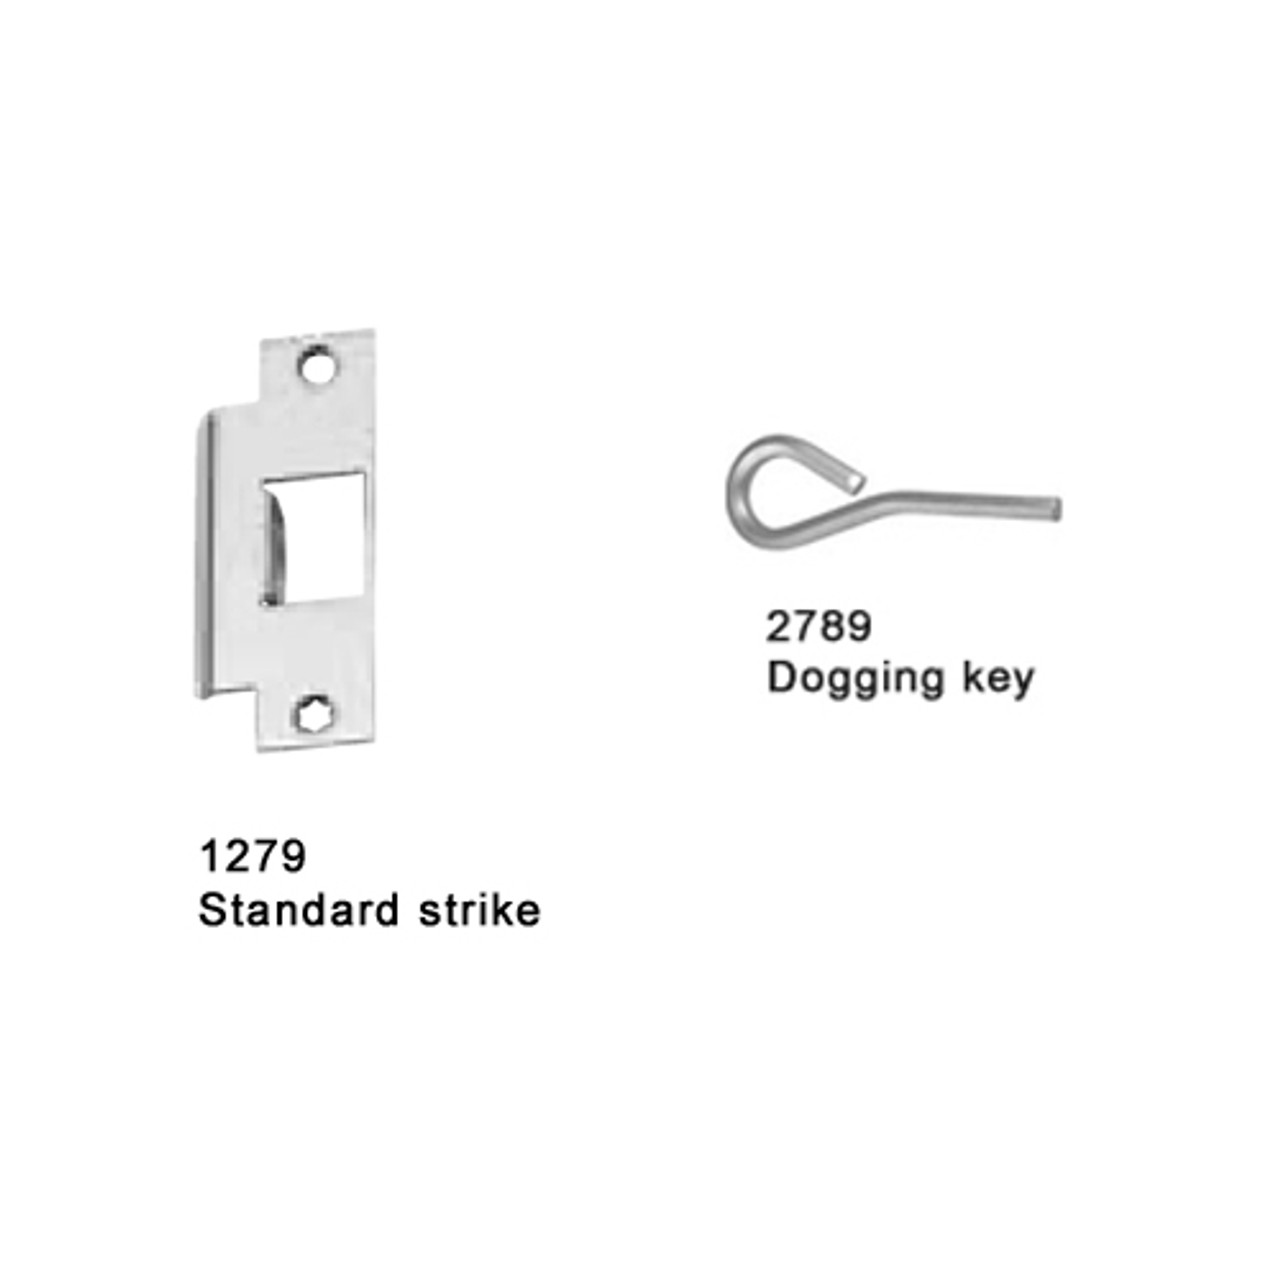 25-M-TP-US10-3-RHR Falcon 25 Series Mortise Lock Devices with 512TP Thumbpiece Trim in Satin Bronze